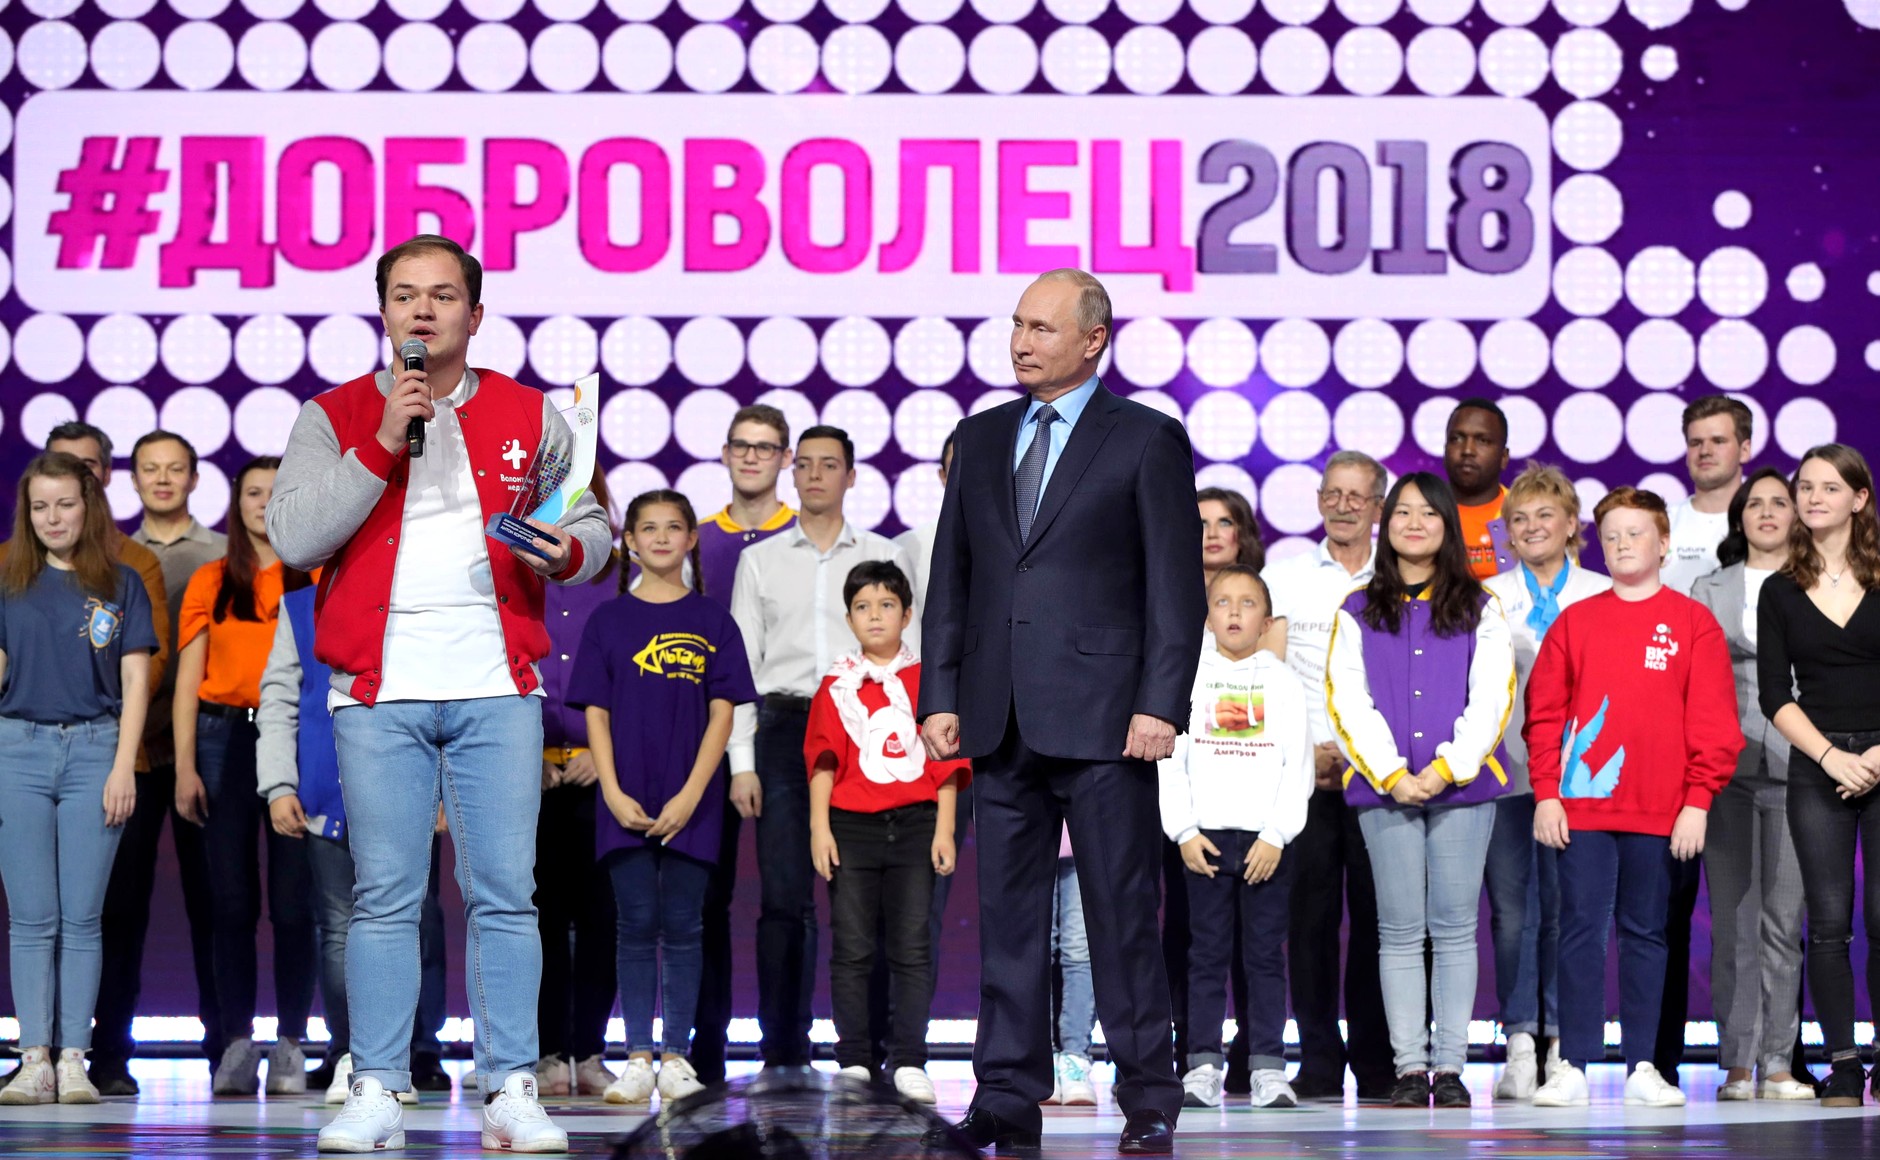 Presenting the Volunteer of Russia 2018 award • President of Russia